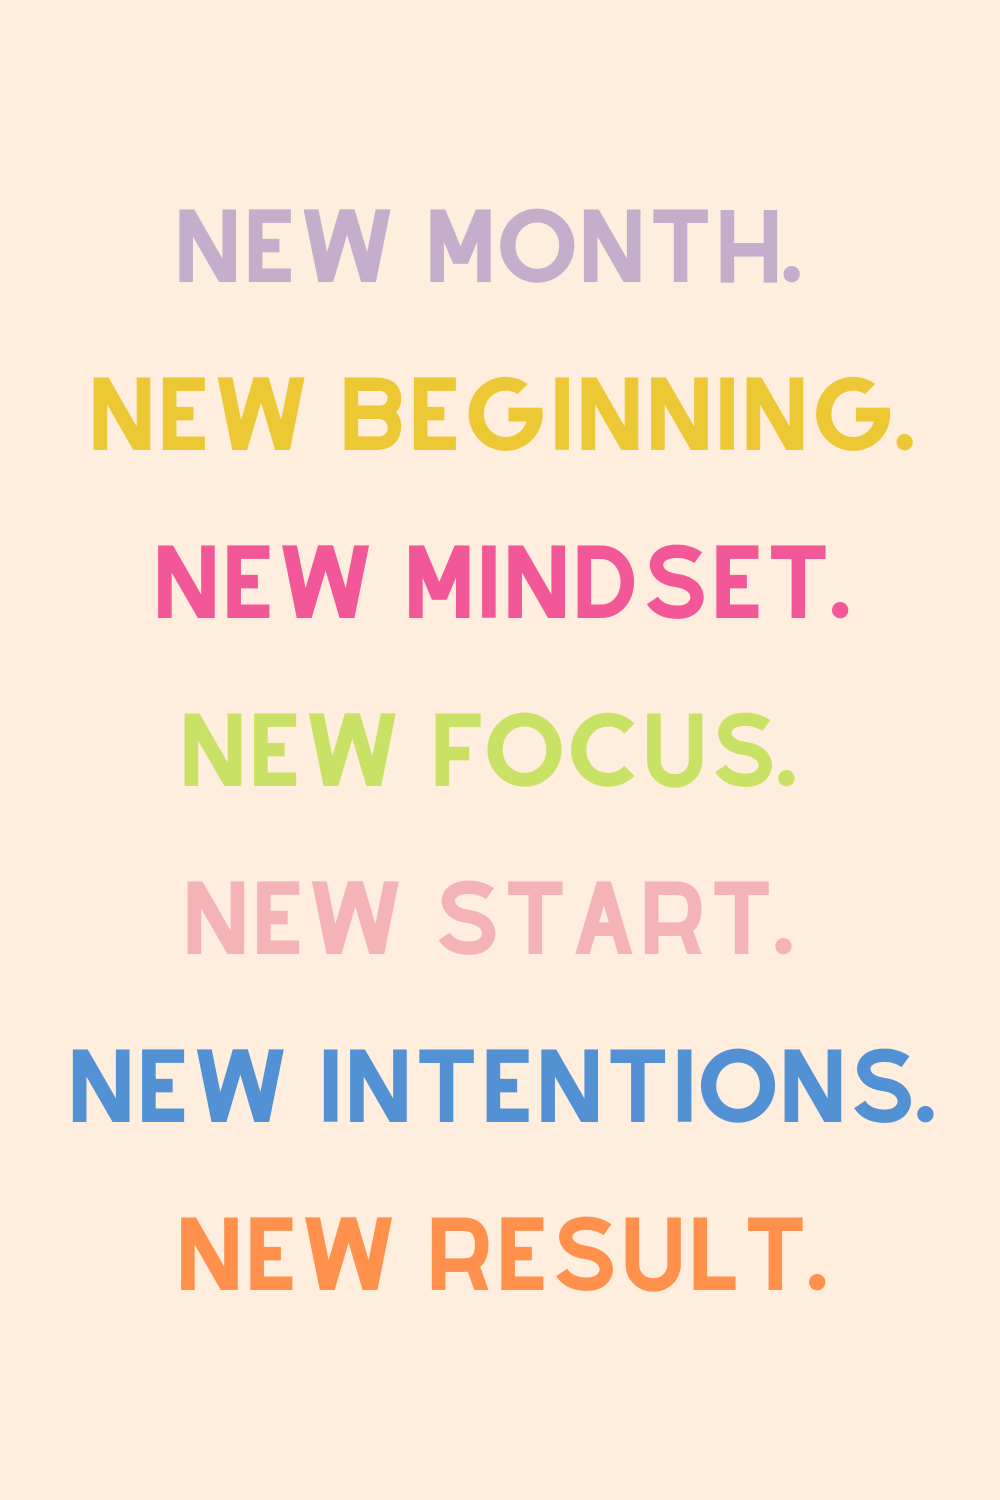 Wishes for a new month